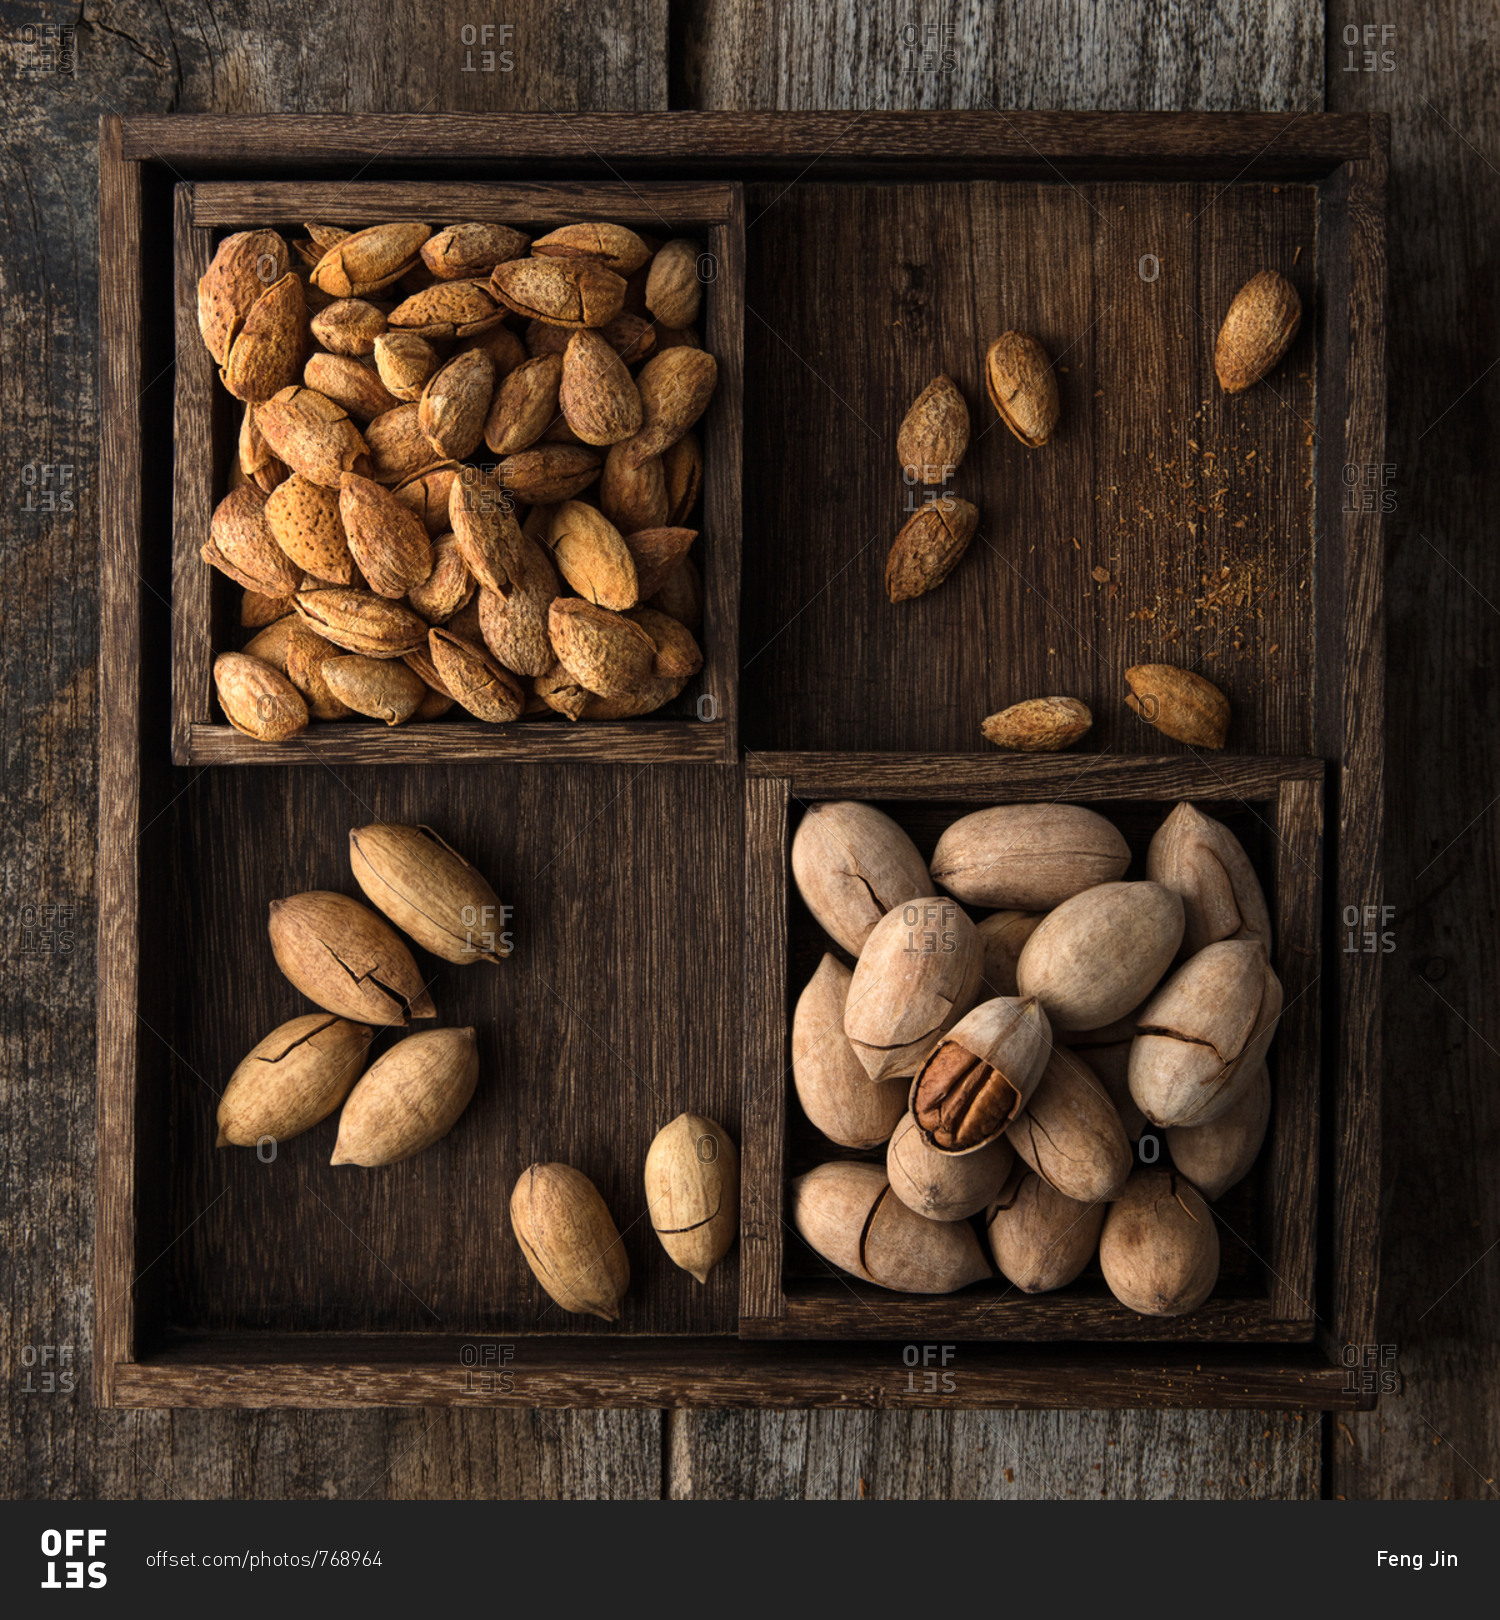 Whole nuts in rustic wooden boxes